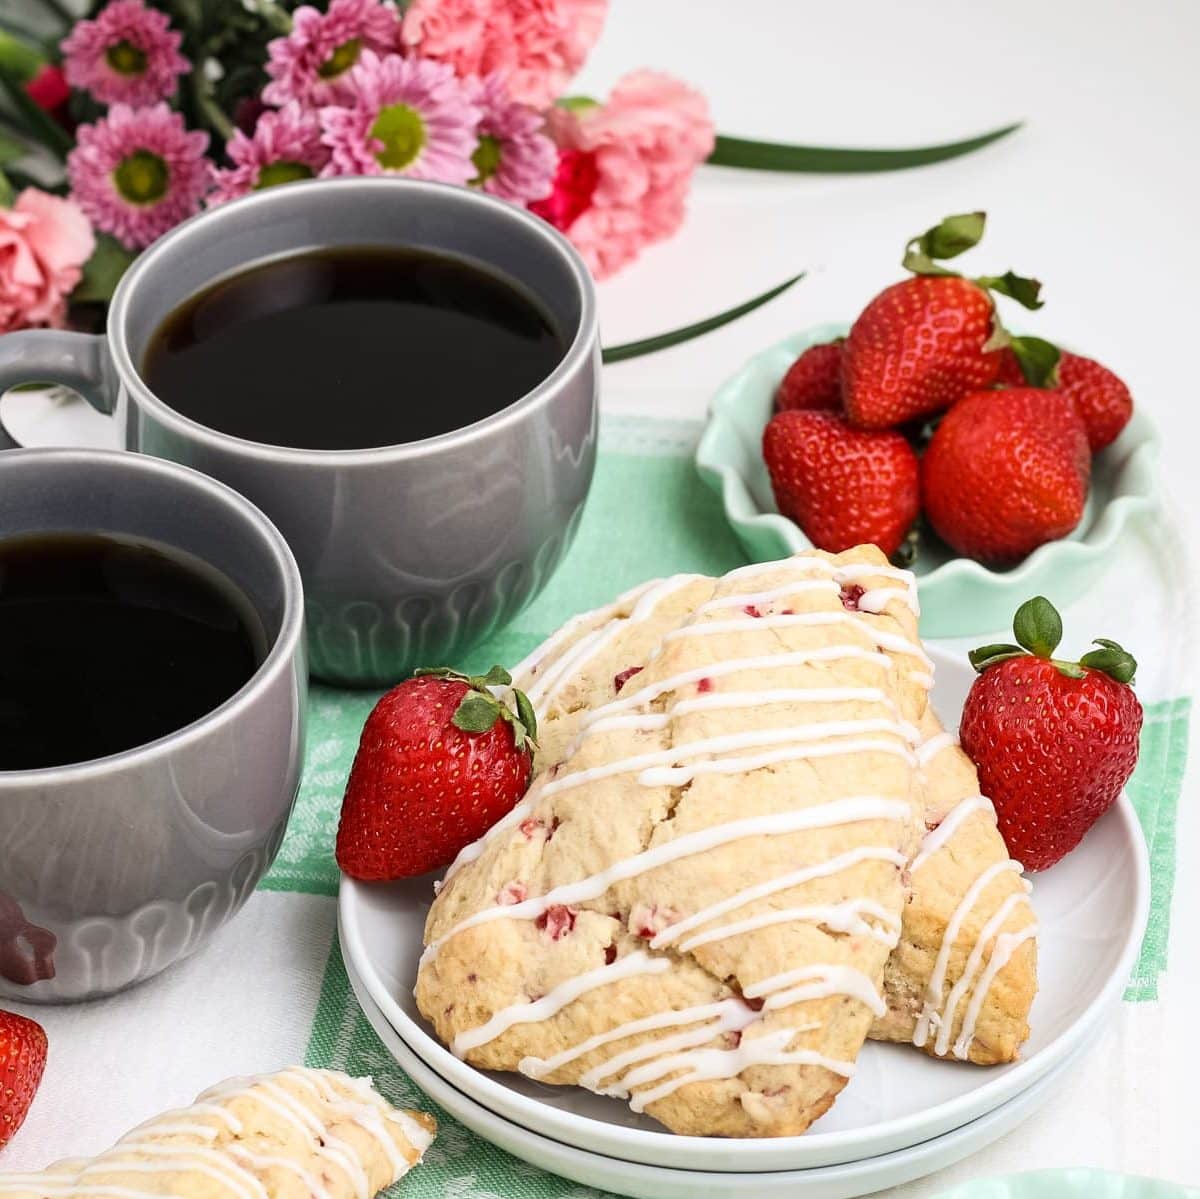 Strawberry scones on a plate with coffee on the side.